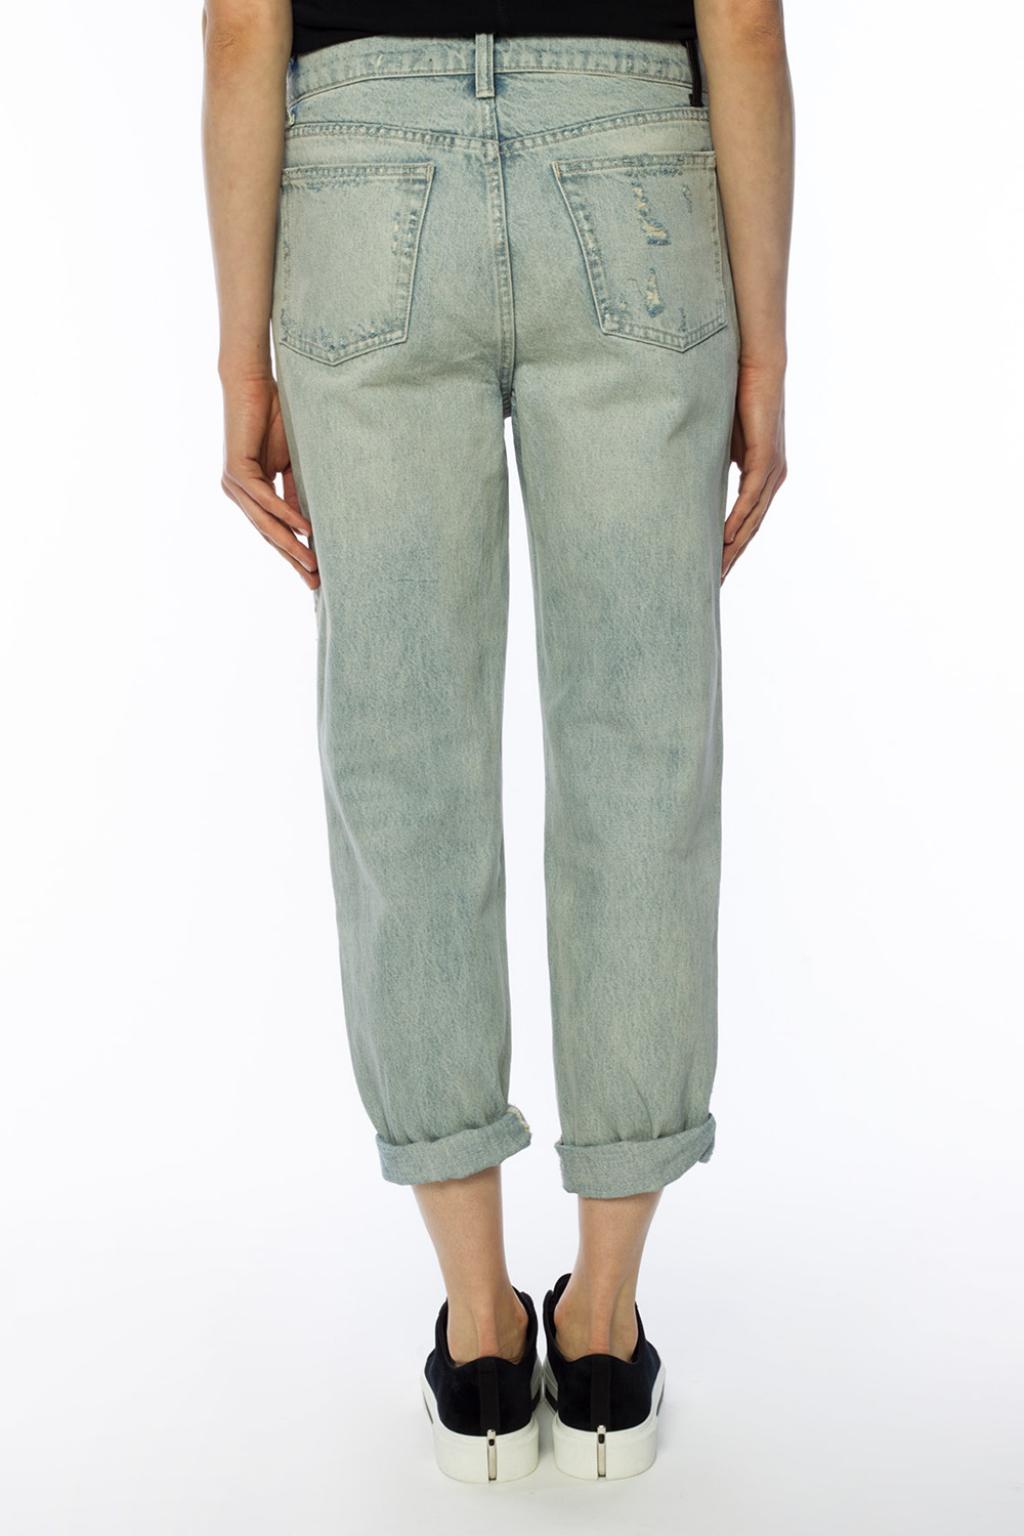 'Slack' jeans with holes T by Alexander Wang - Vitkac US